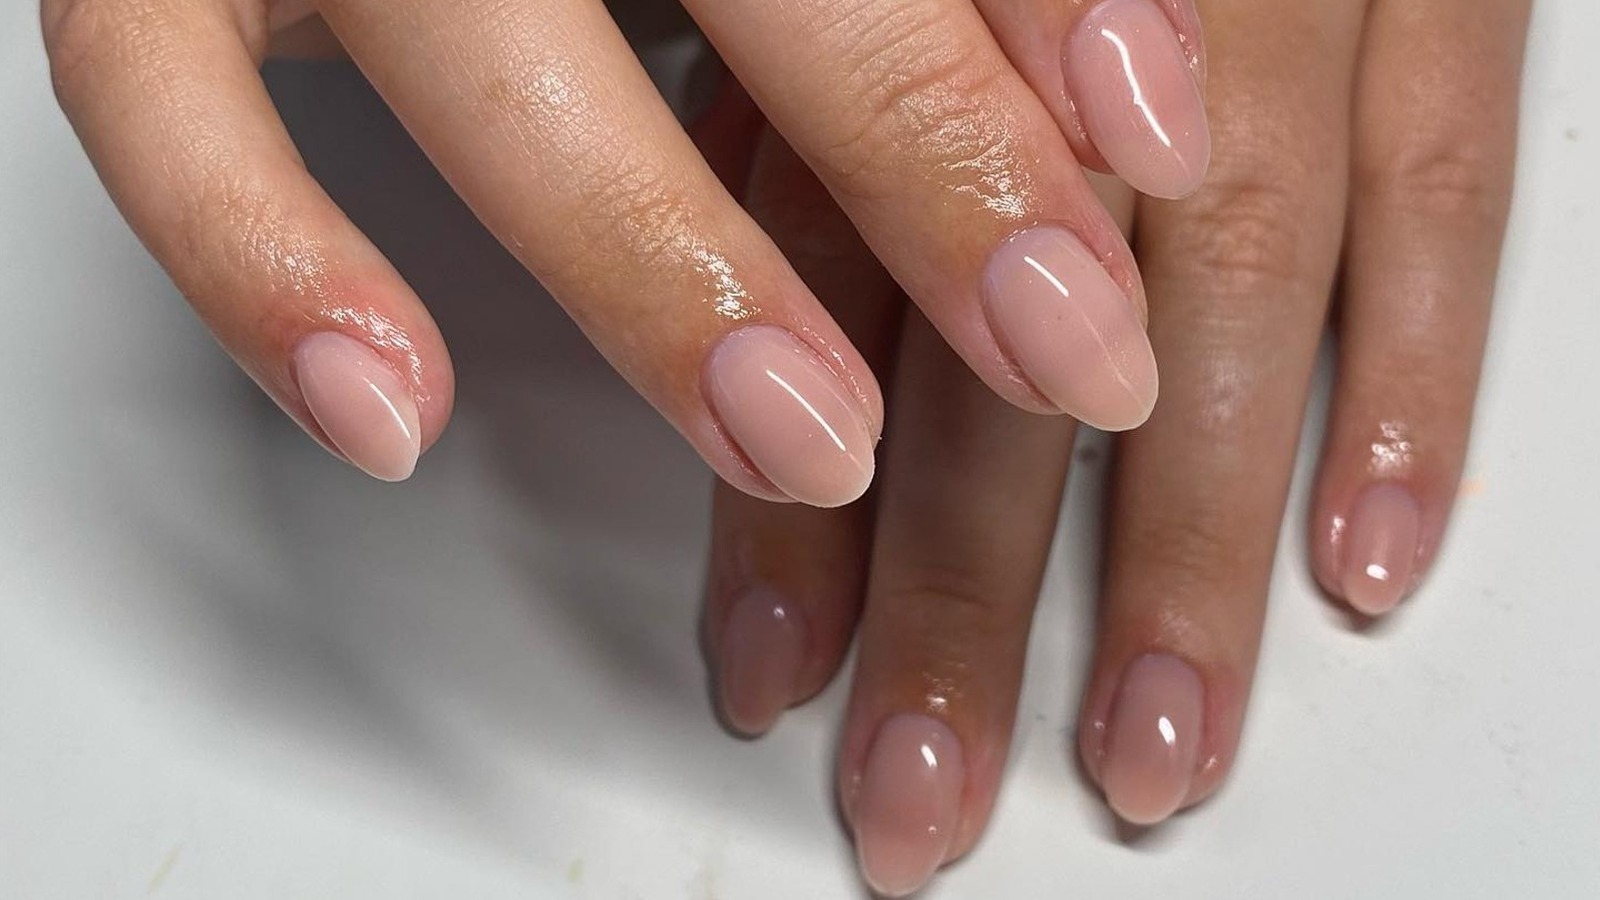 35 Almond Nails Designs To Refresh Your Look